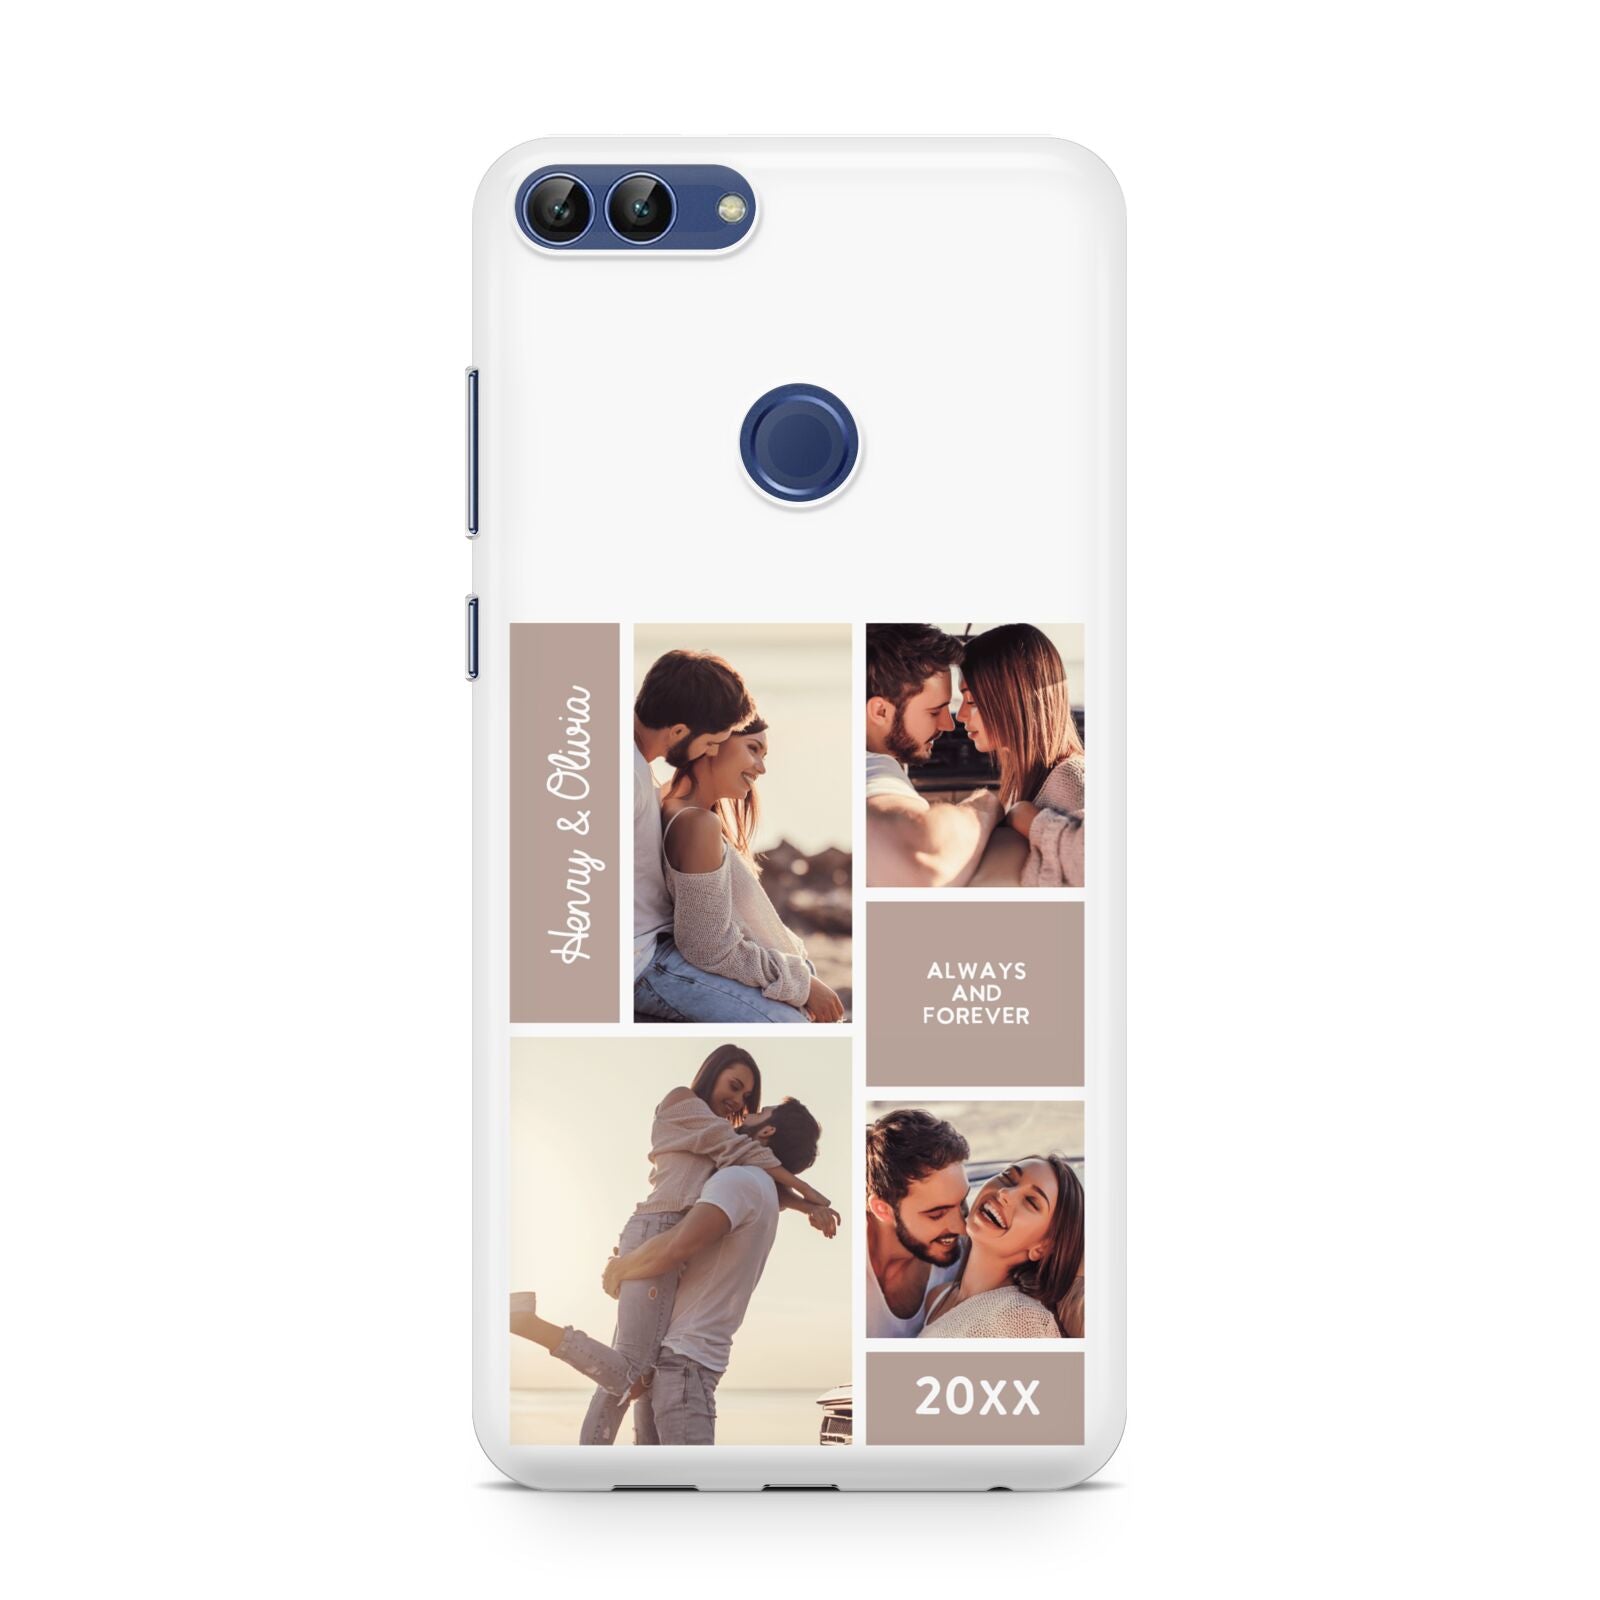 Couples Valentine Photo Collage Personalised Huawei P Smart Case